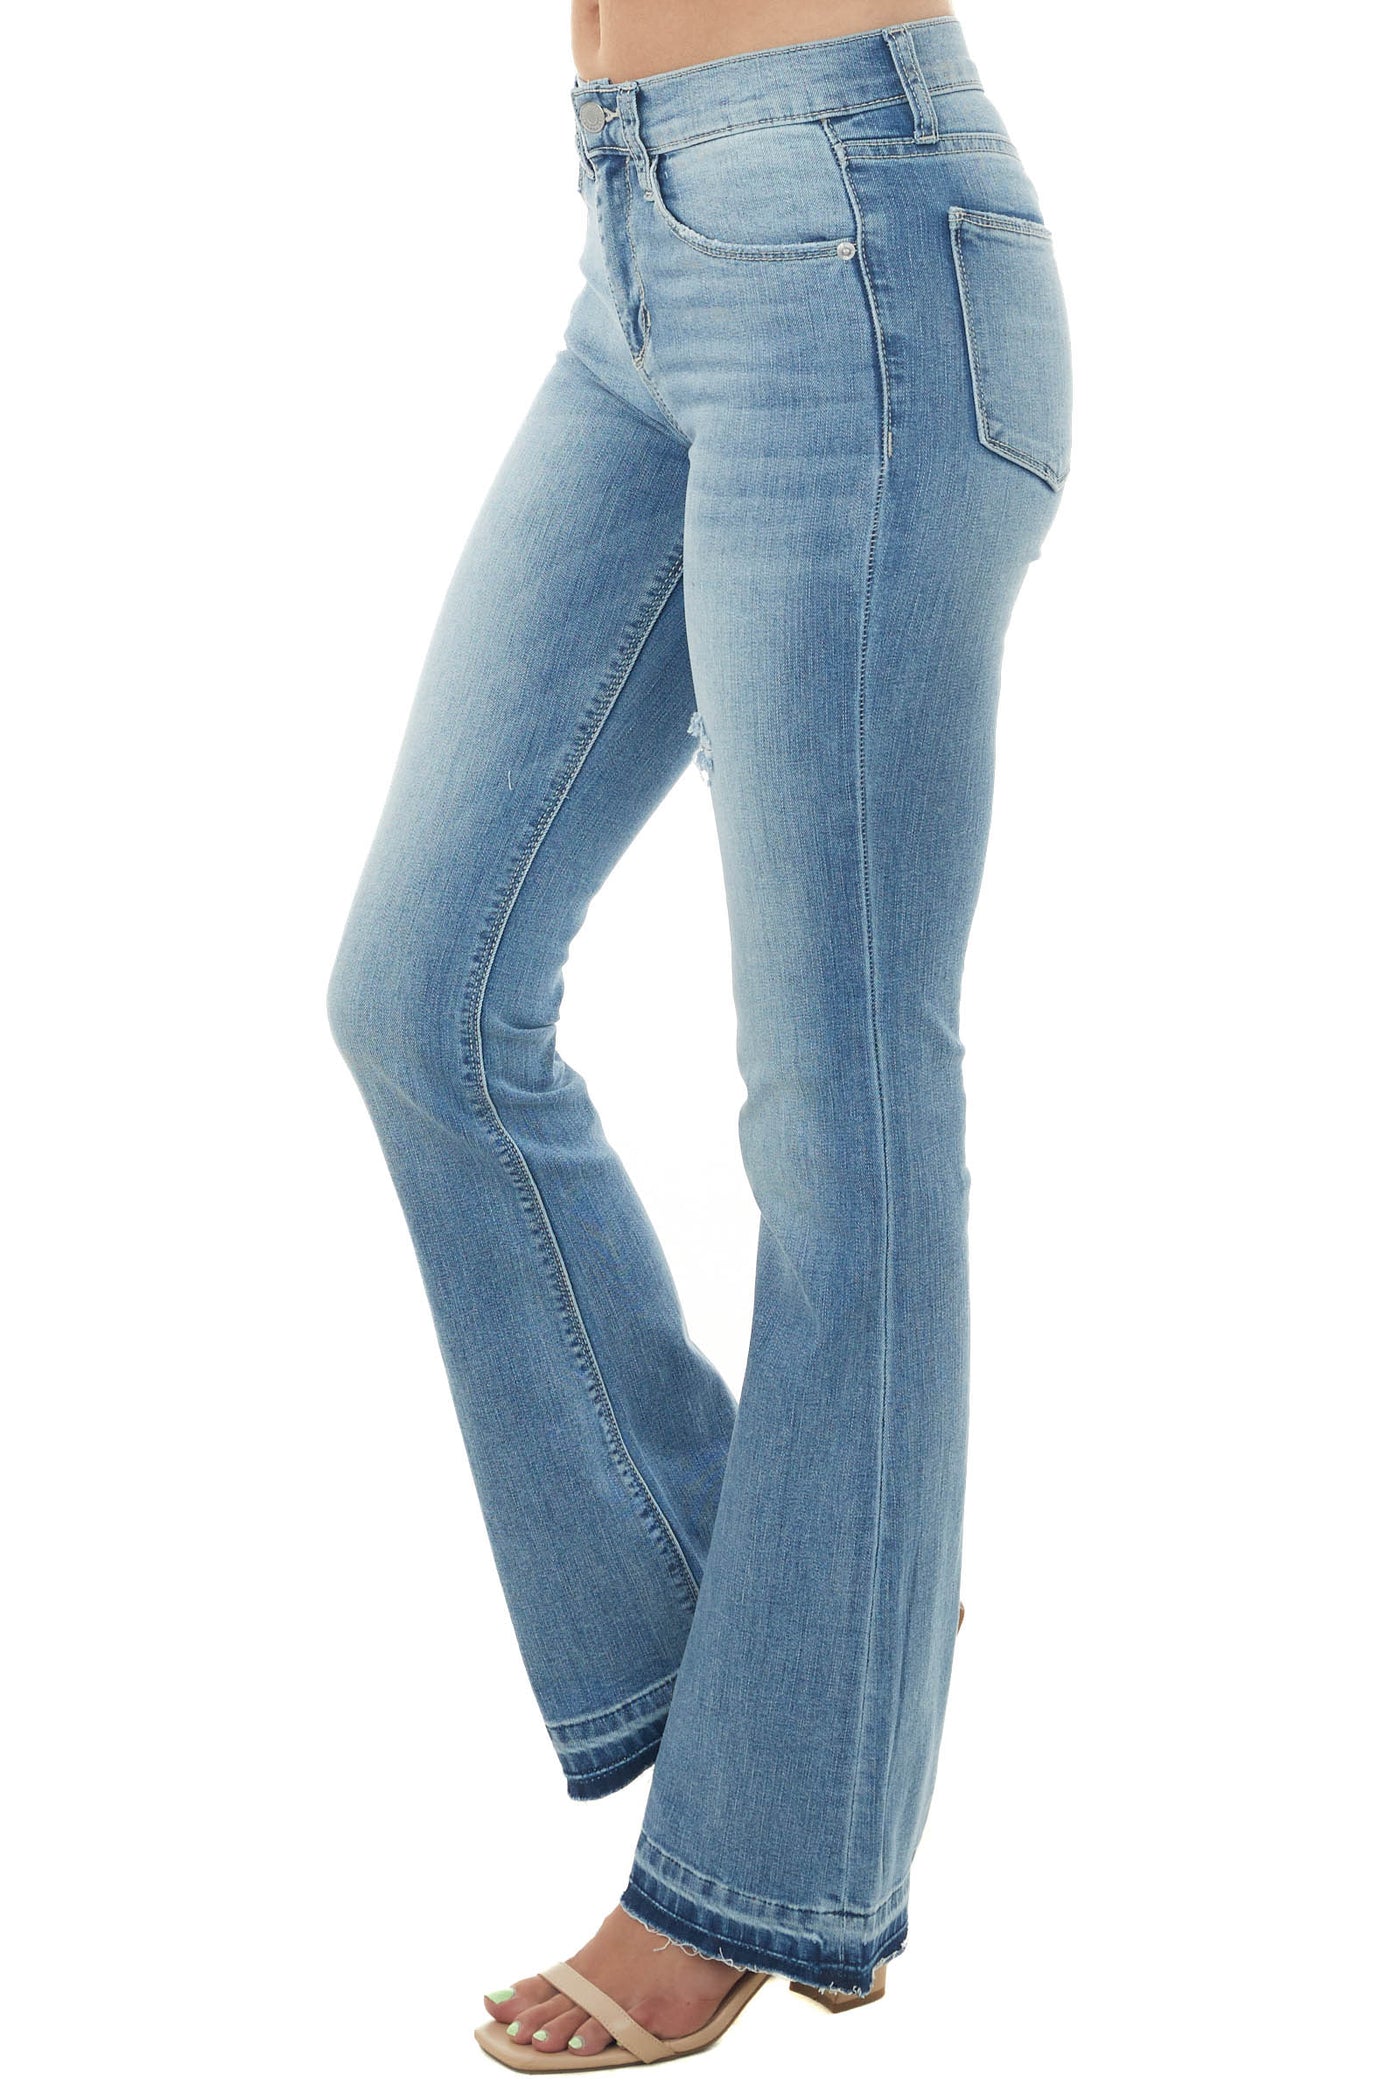 Light Wash Mid Rise Bootcut Jeans with Dark Hem